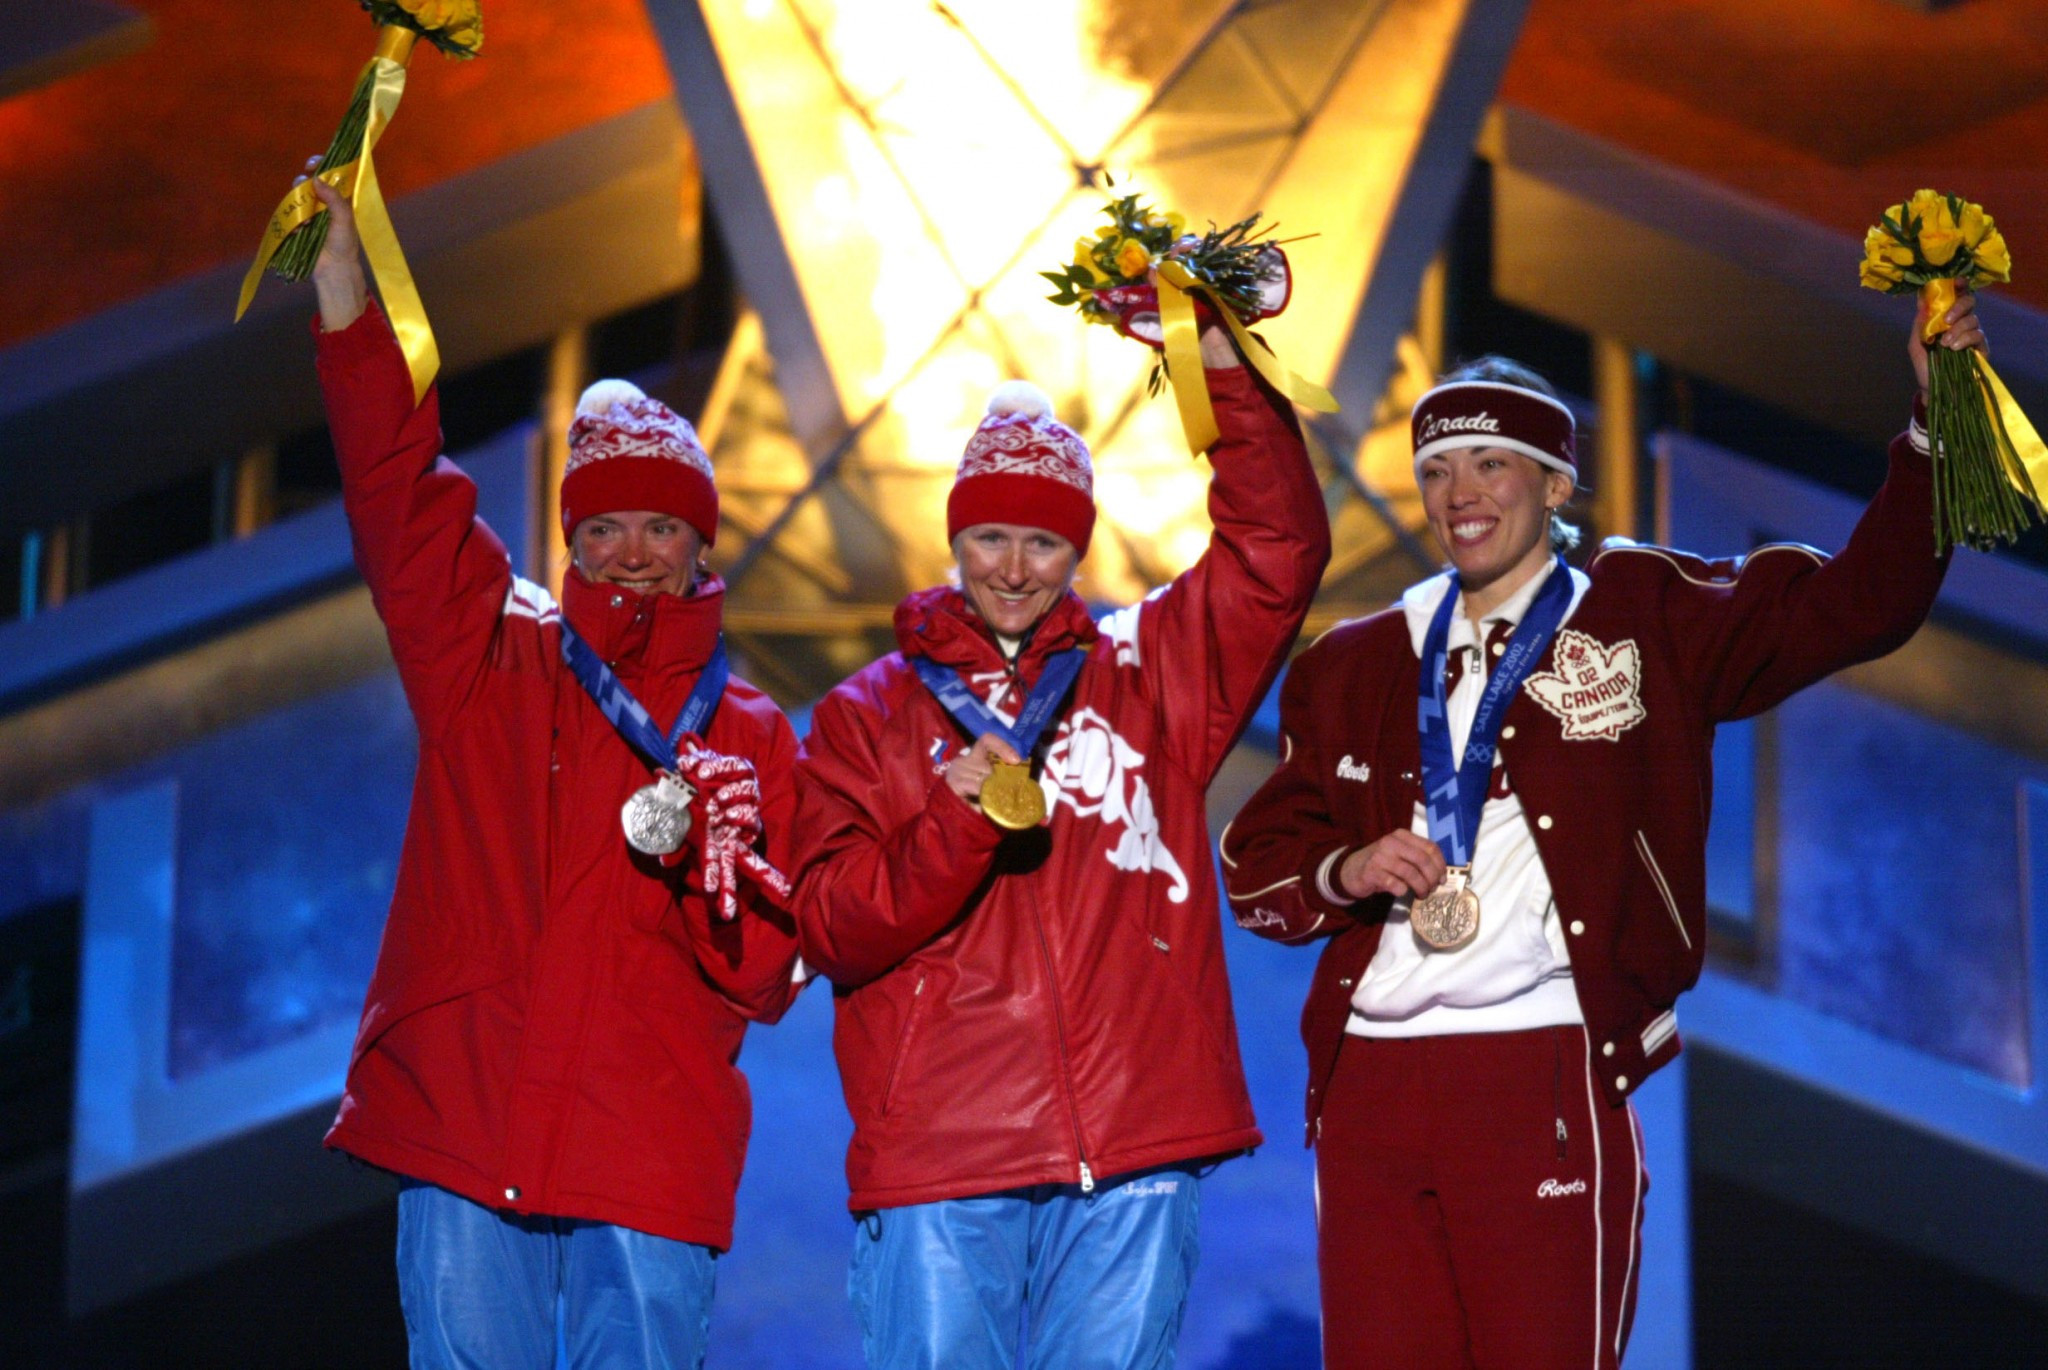 Canada's Beckie Scott, right, originally finished third at Salt Lake City 2002 before being upgraded after Russians Olga Danilova, centre, and Larissa Lazutina were each disqualified ©Getty Images